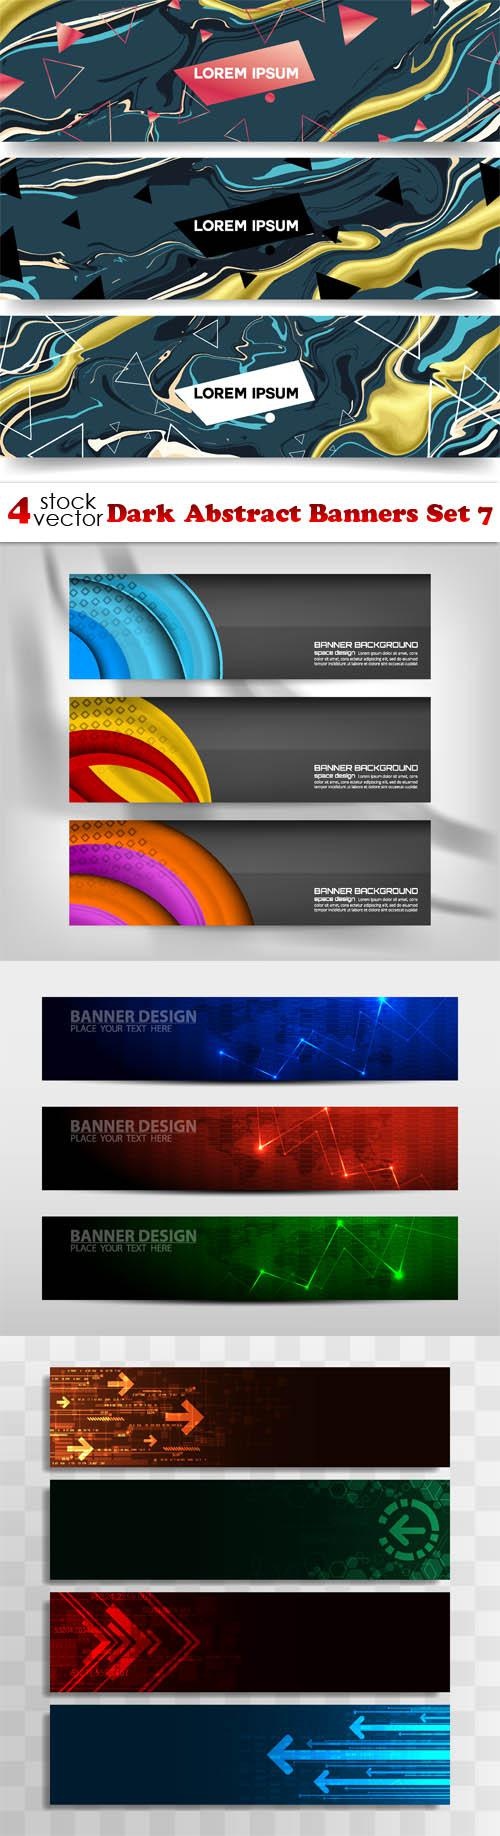 Dark Abstract Banners Set 7 (9 files)